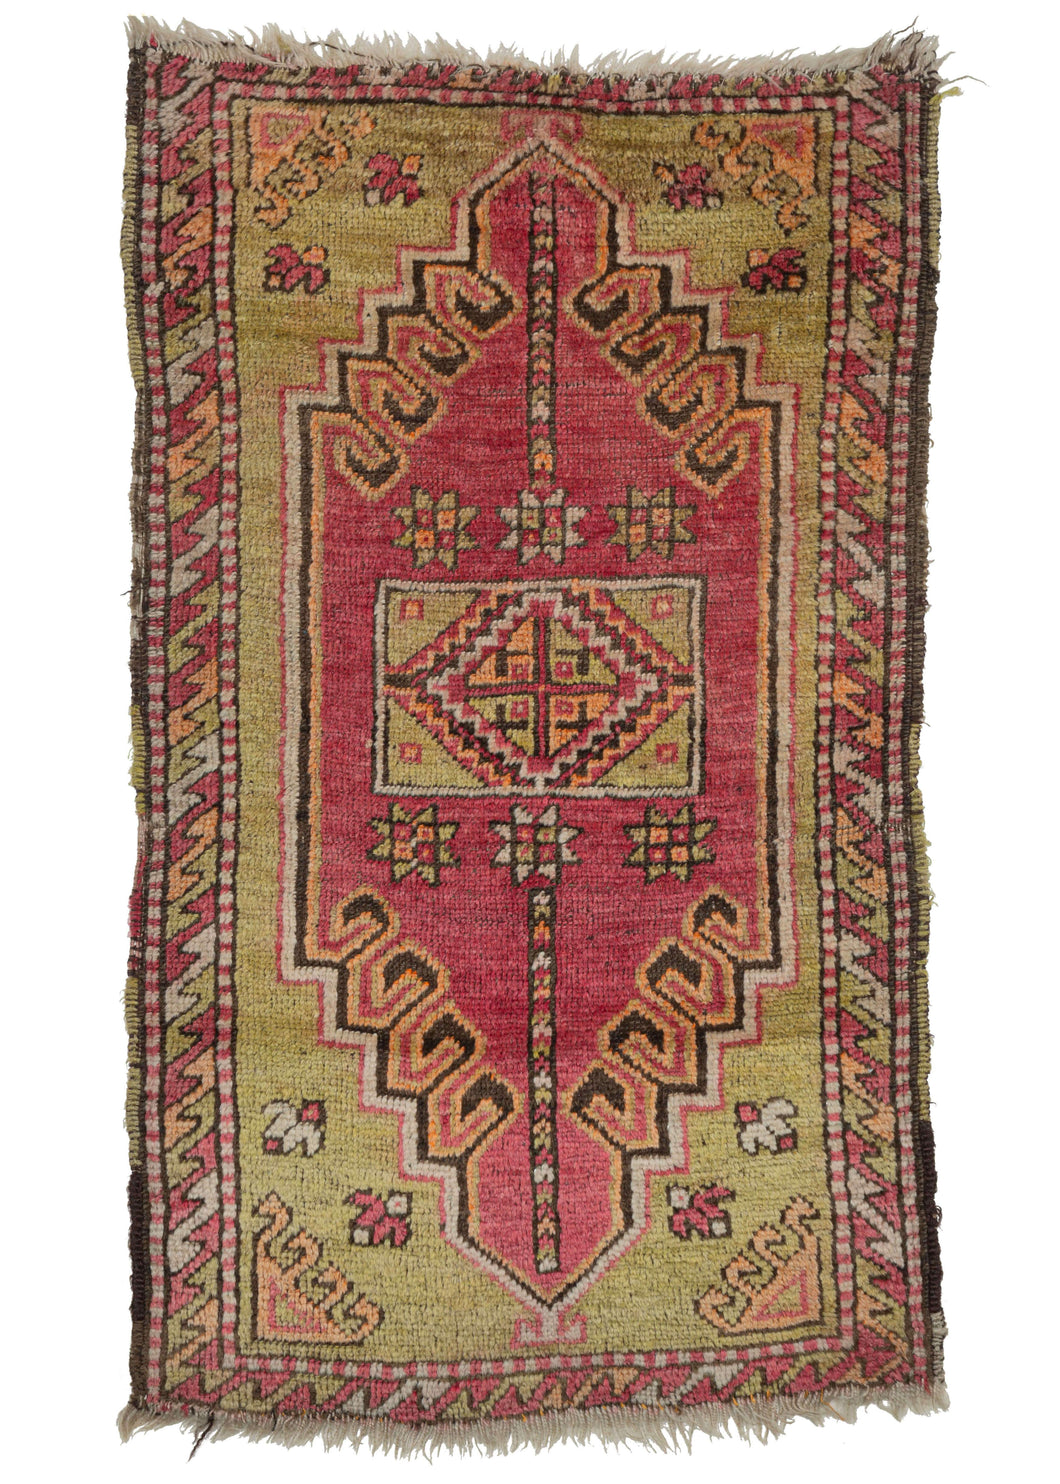 Turkish Yastik rug features a latch-hooked purplish pink field which offers a pleasing contrast with the pistachio center and cornices. Chocolate, ivory and creamsicle provide lively accents. The whole is framed by a border of tightly interlocking 